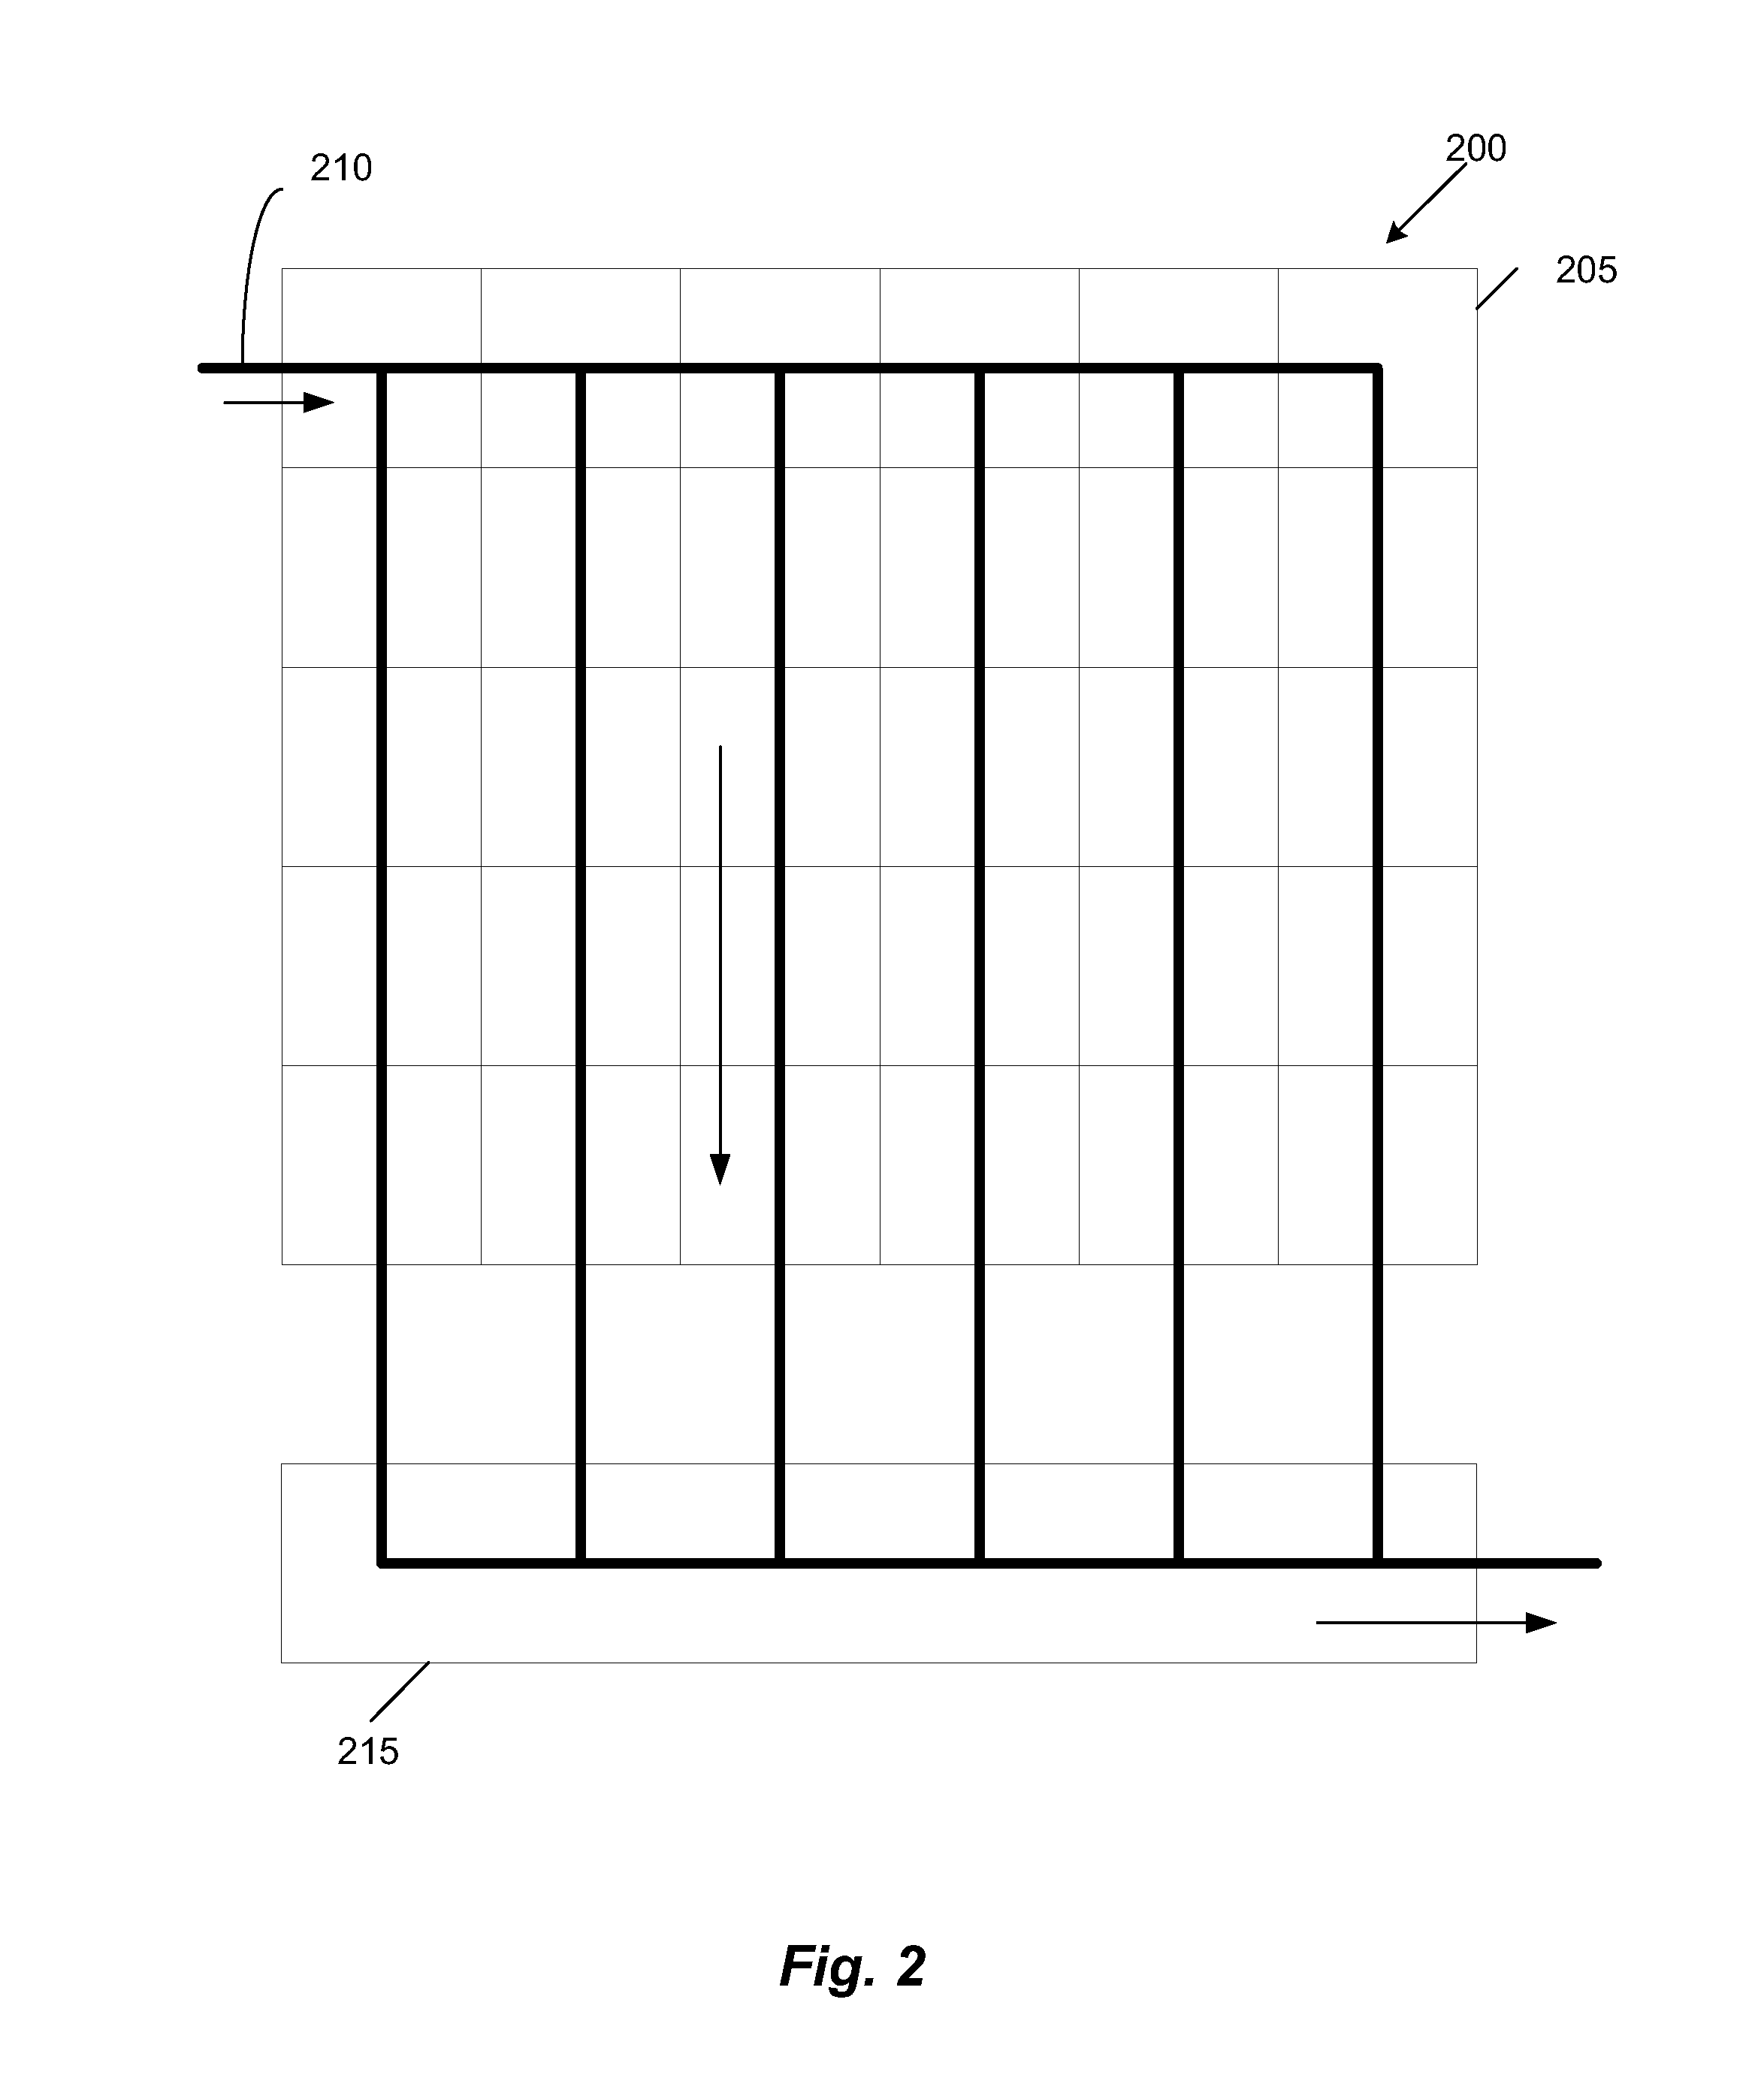 Trigger circuits and event counters for an IC